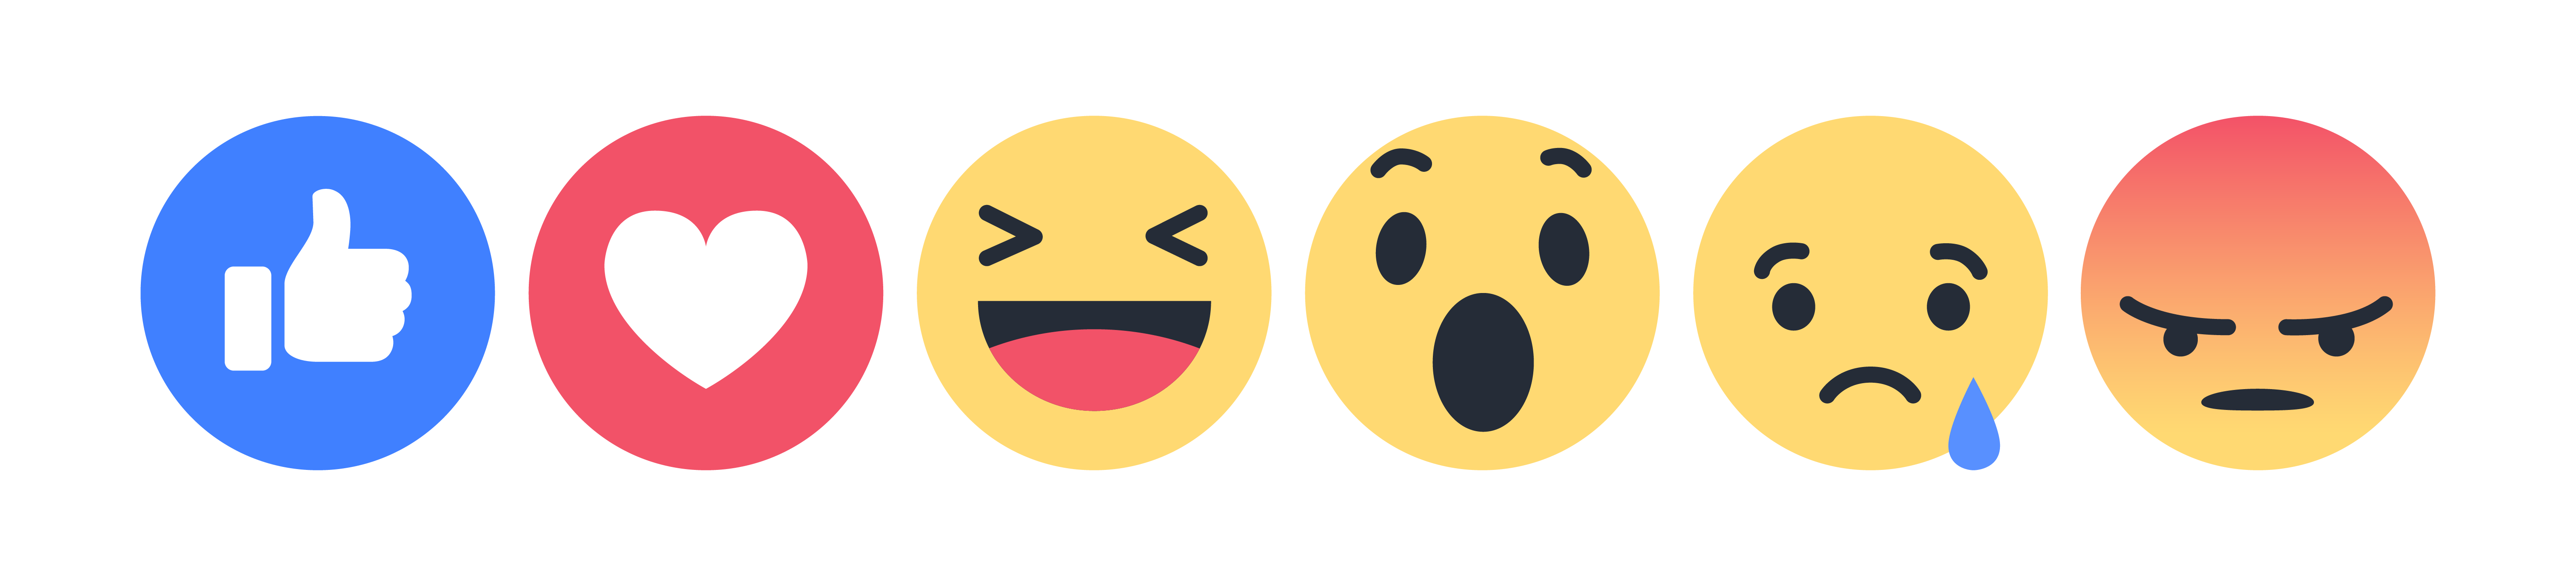 Buy Facebook Emoticons - LOVE, HAHA, WOW, SAD, ANGRY Reactions